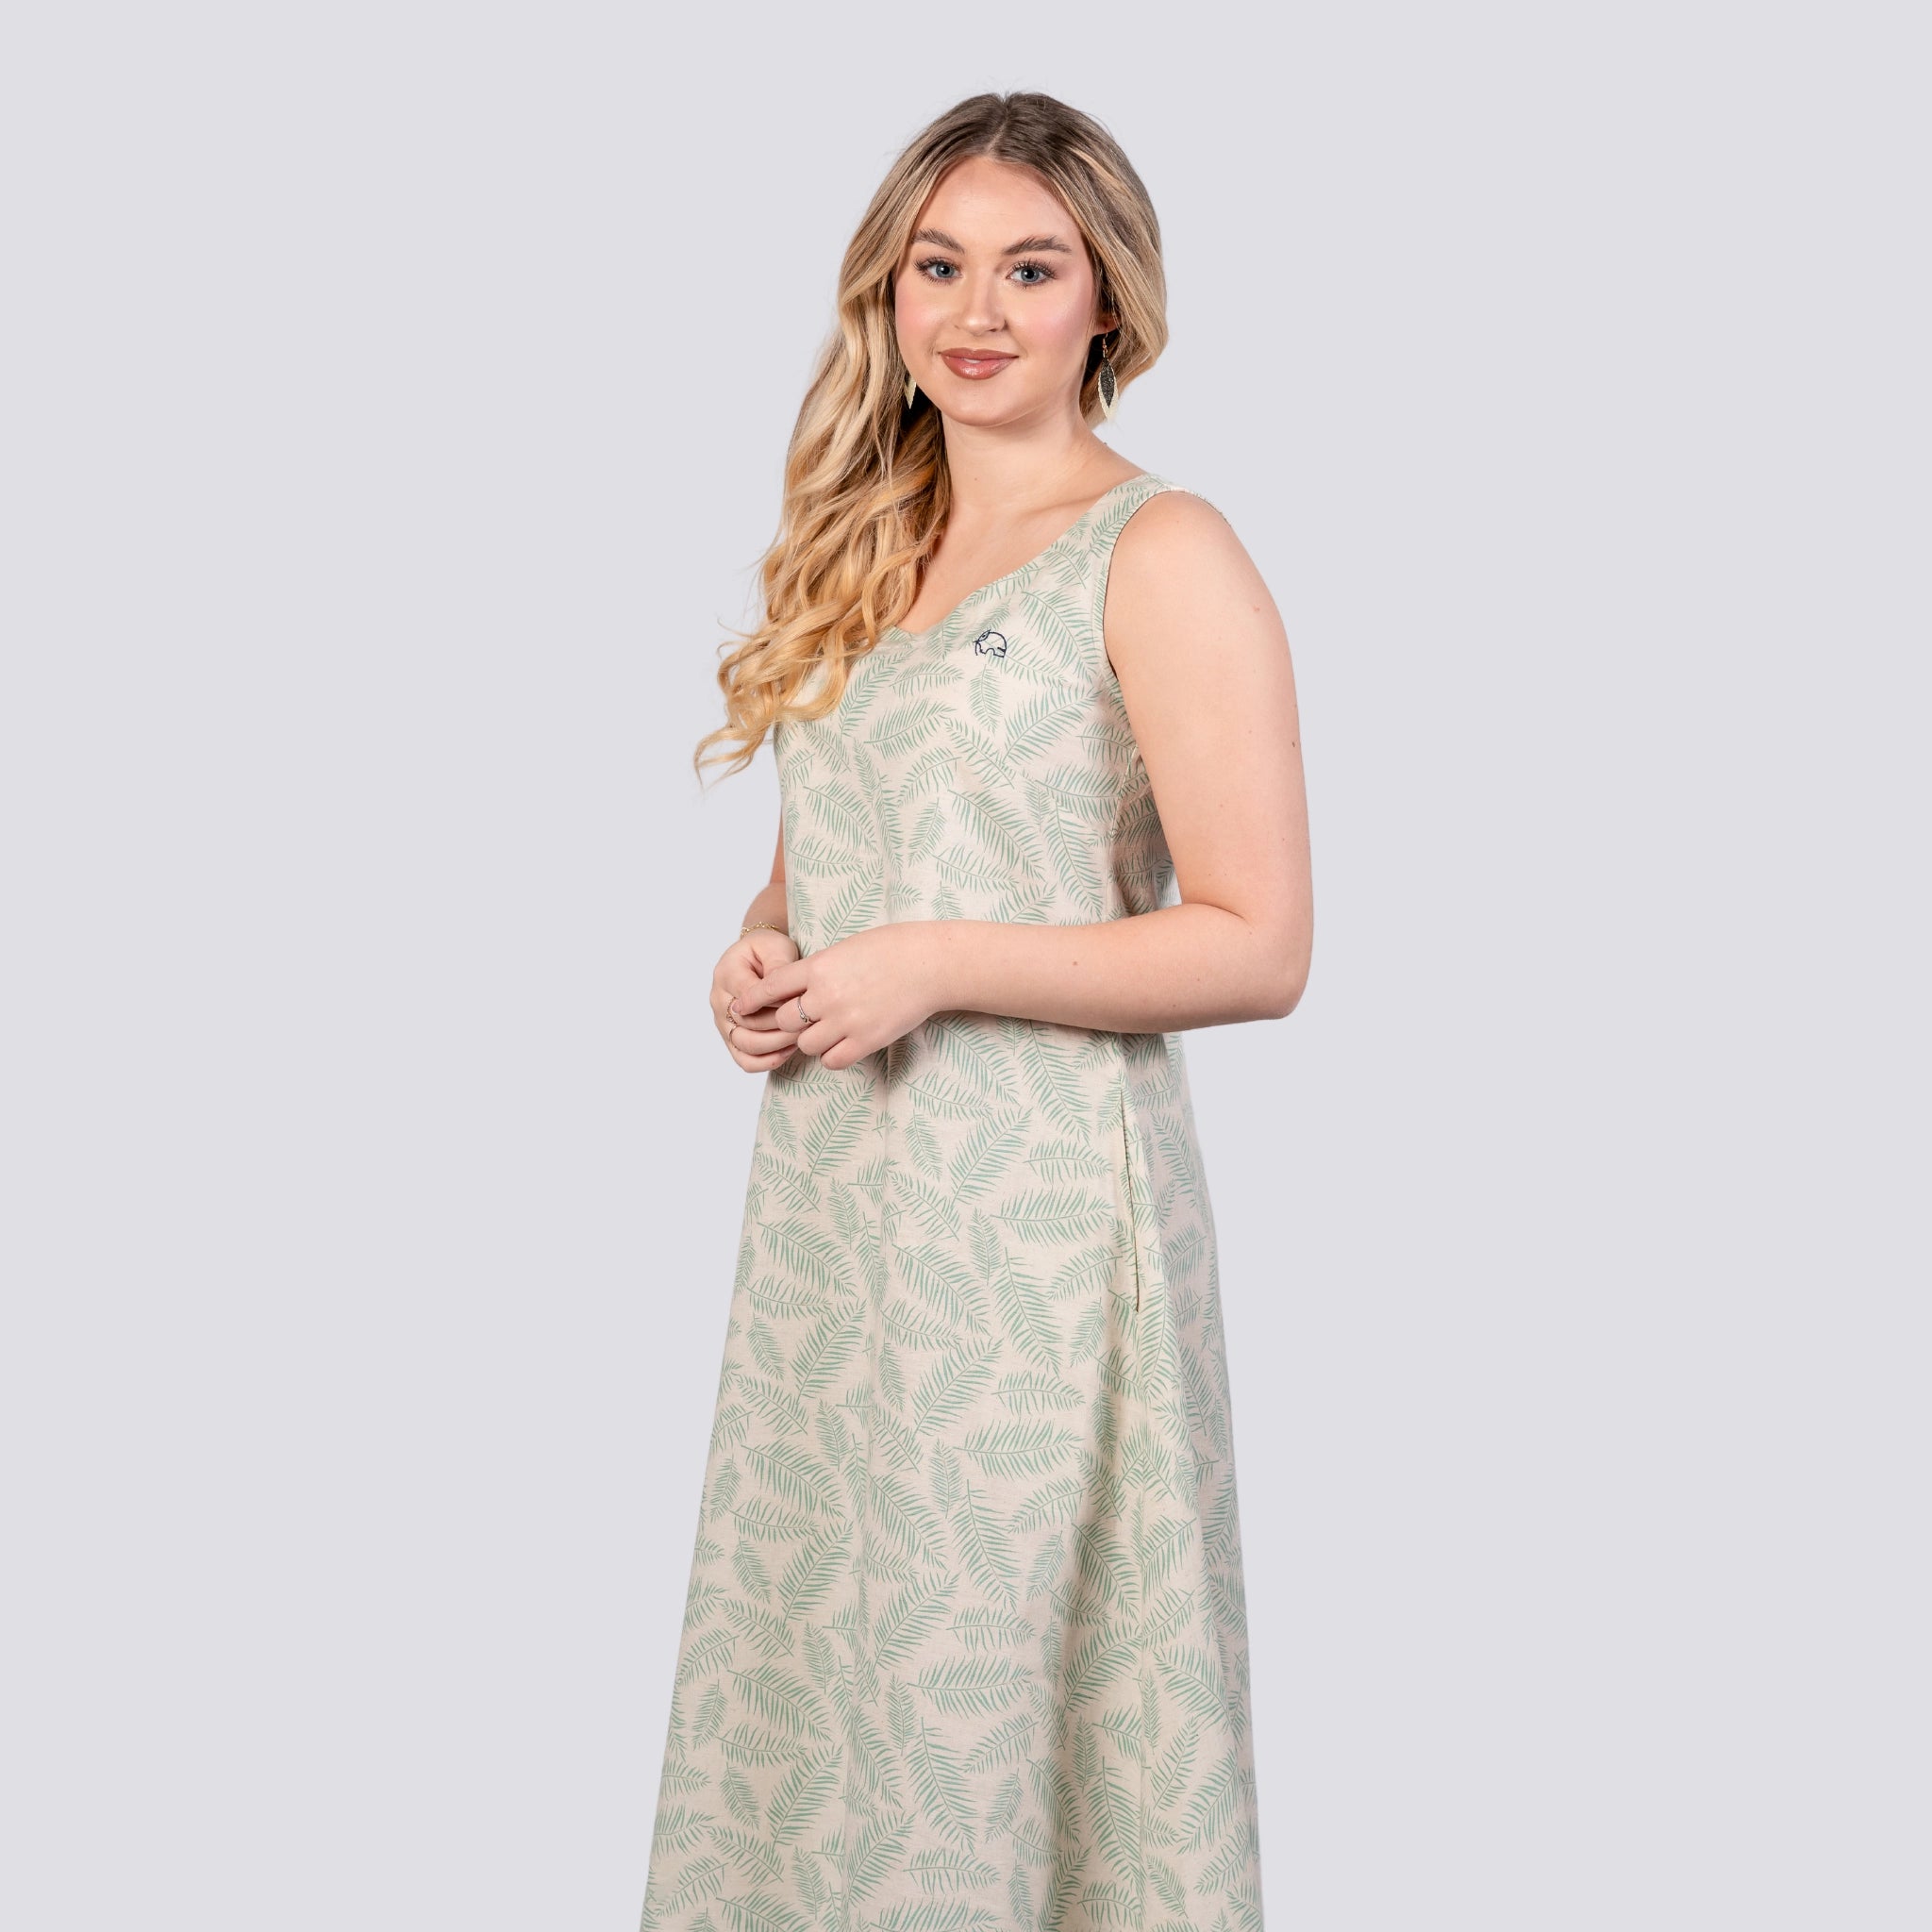 A young woman with long, wavy blonde hair wearing a sleeveless U-neck, patterned Karee Mystic Breeze High Low Linen Cotton Midi Dress, standing and smiling against a light grey background.